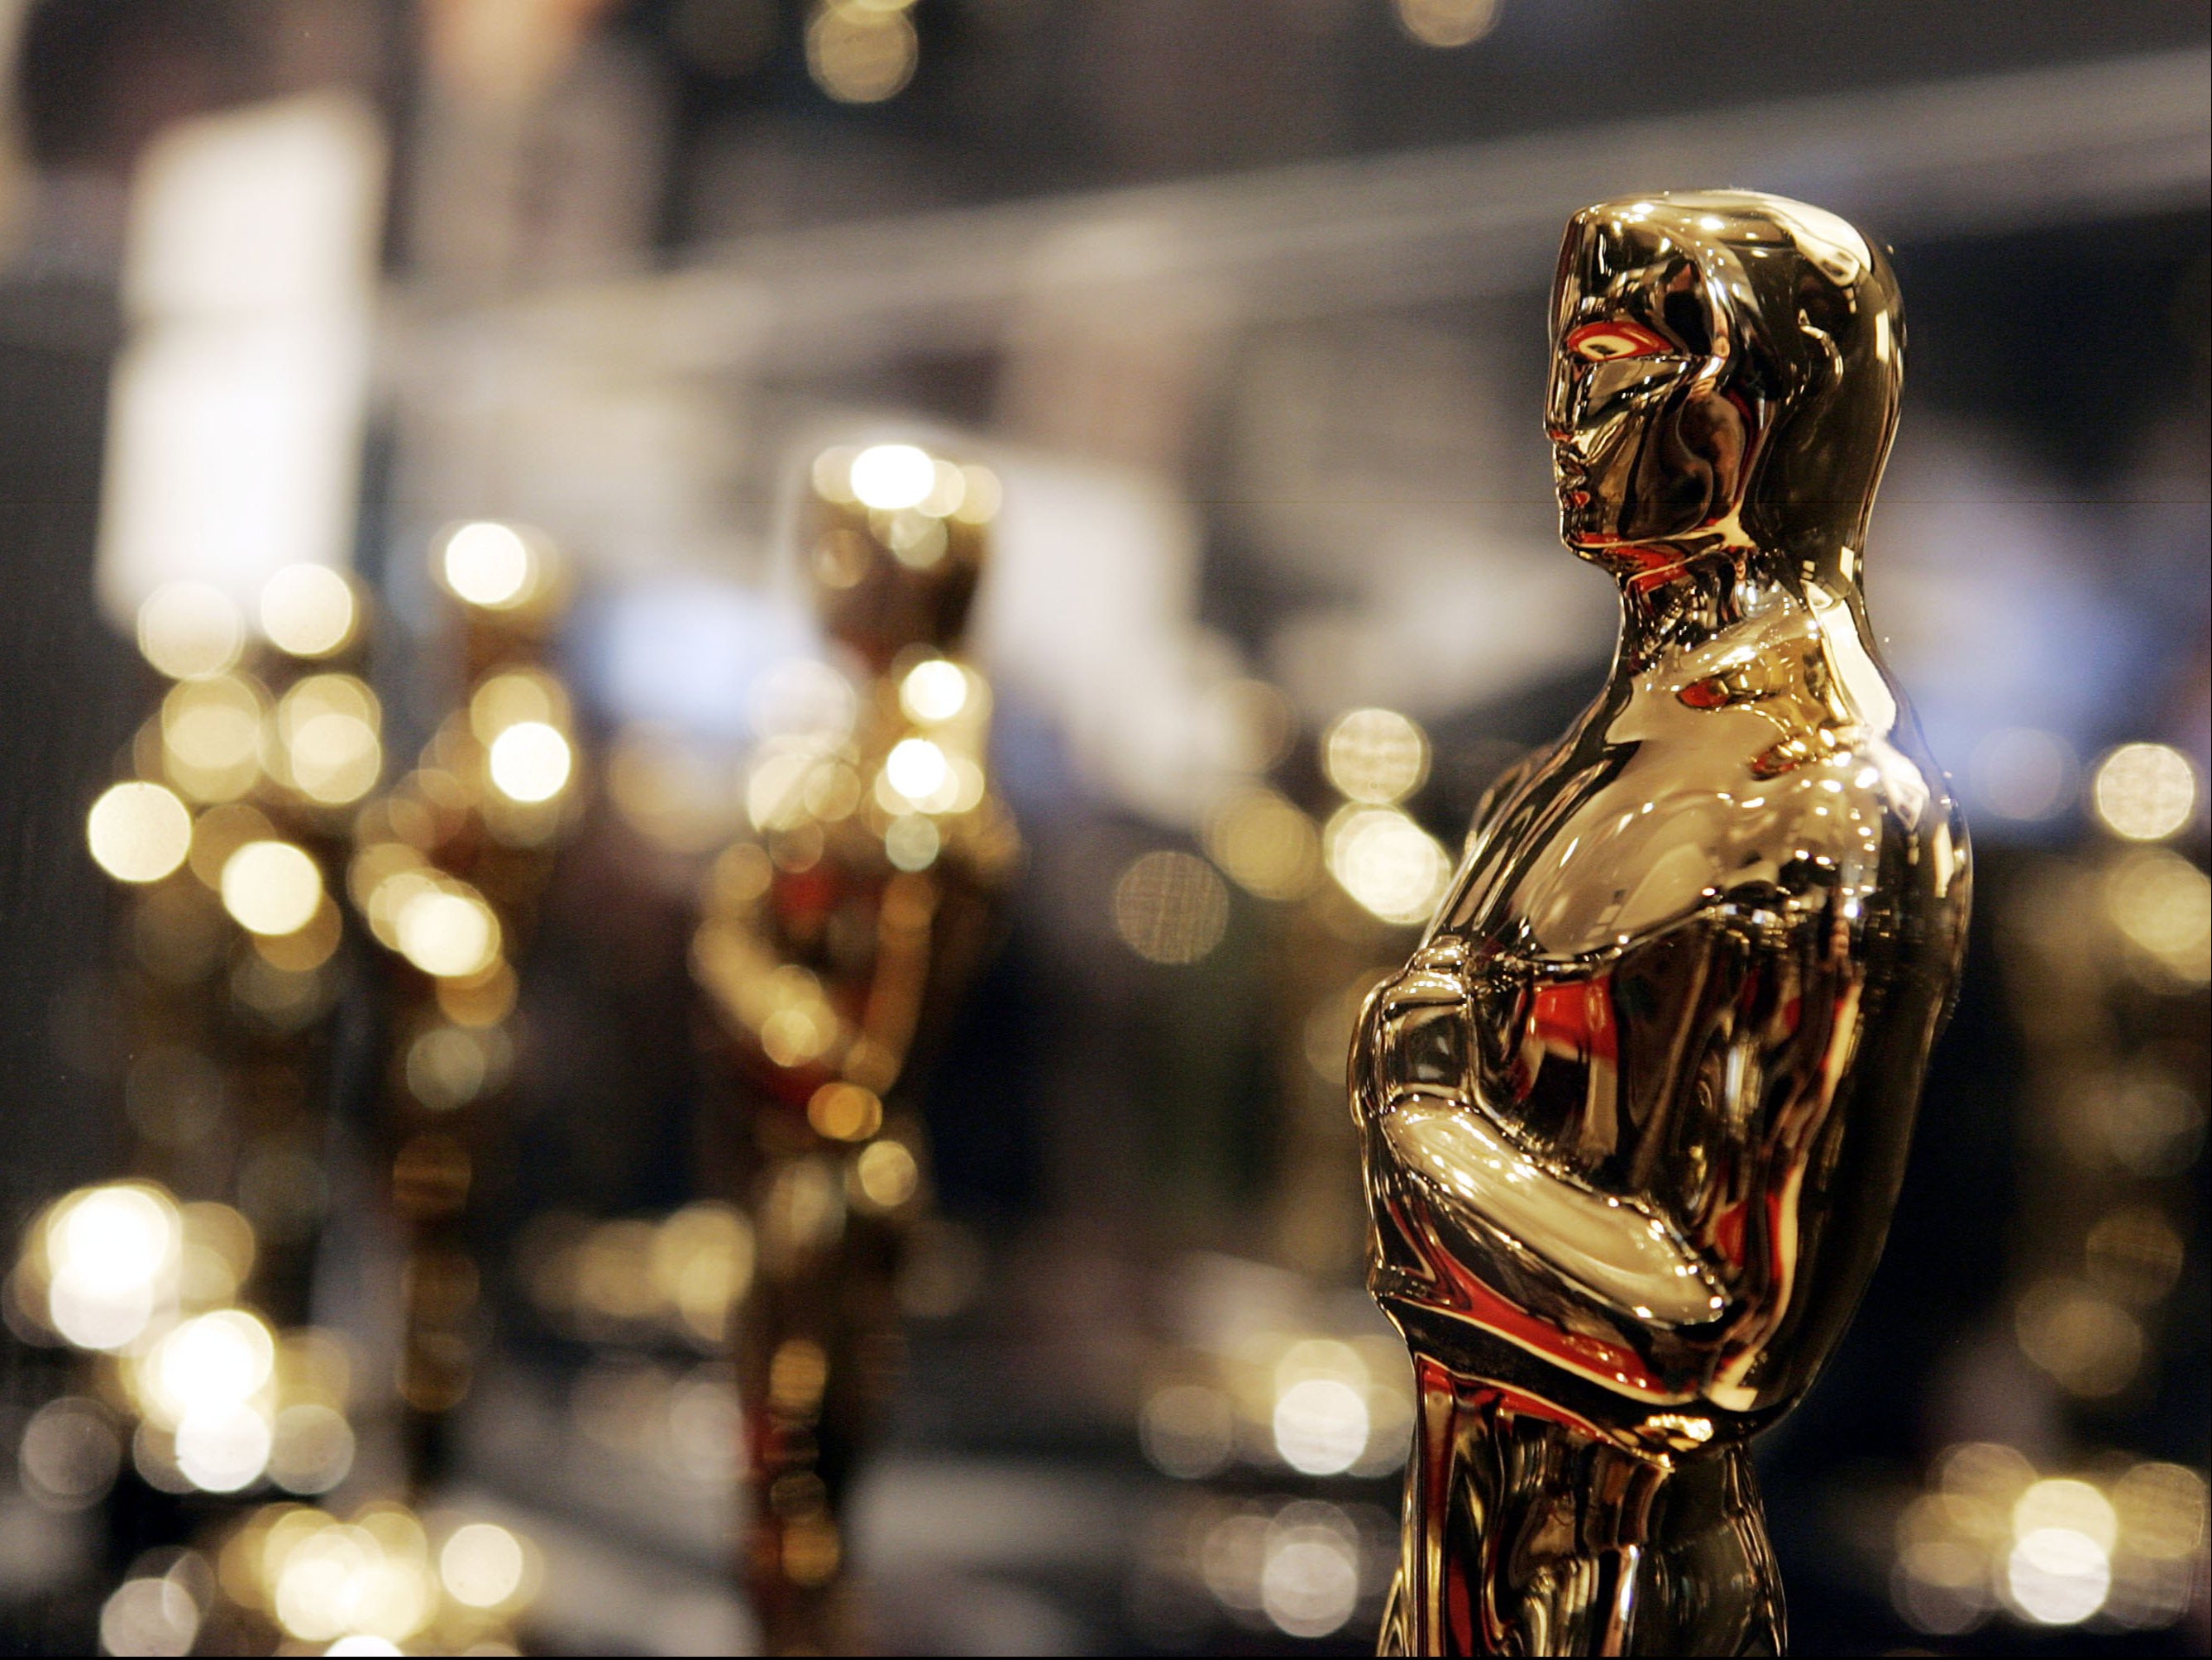 The Independent’s culture reporter Jacob Stolworthy will be tackling your burning Oscars questions